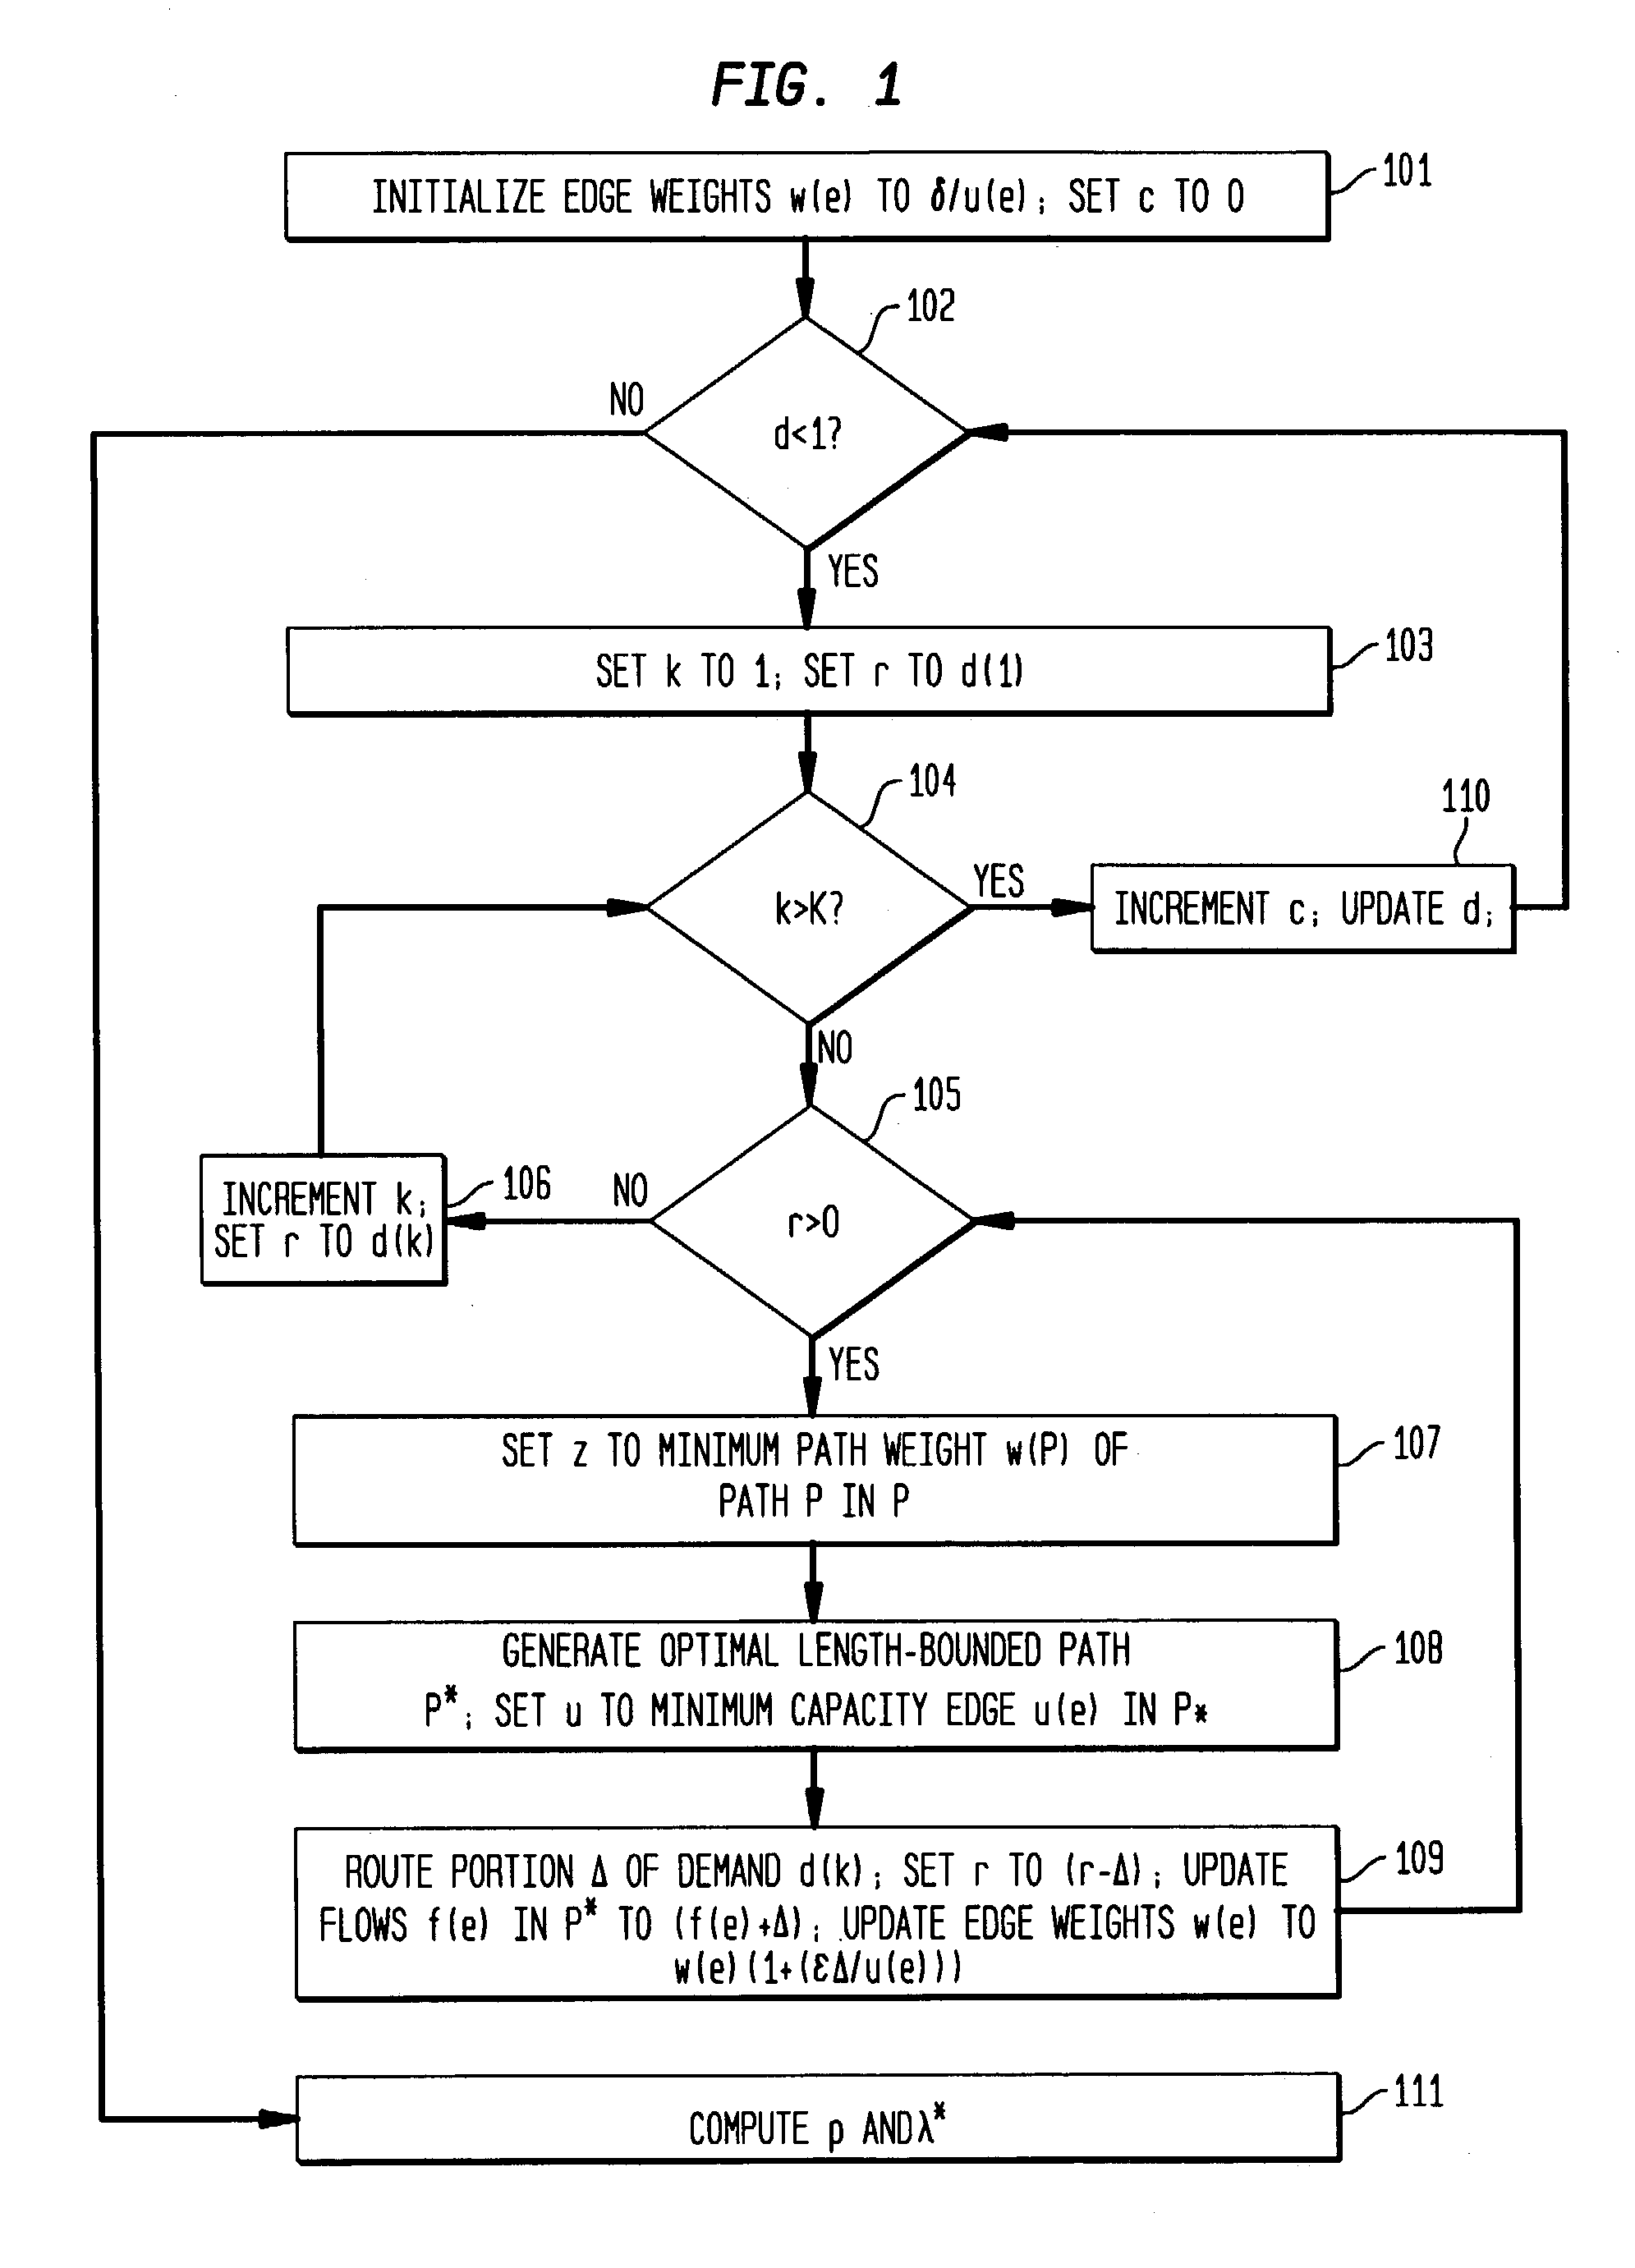 Capacity allocation for networks having path length routing constraints